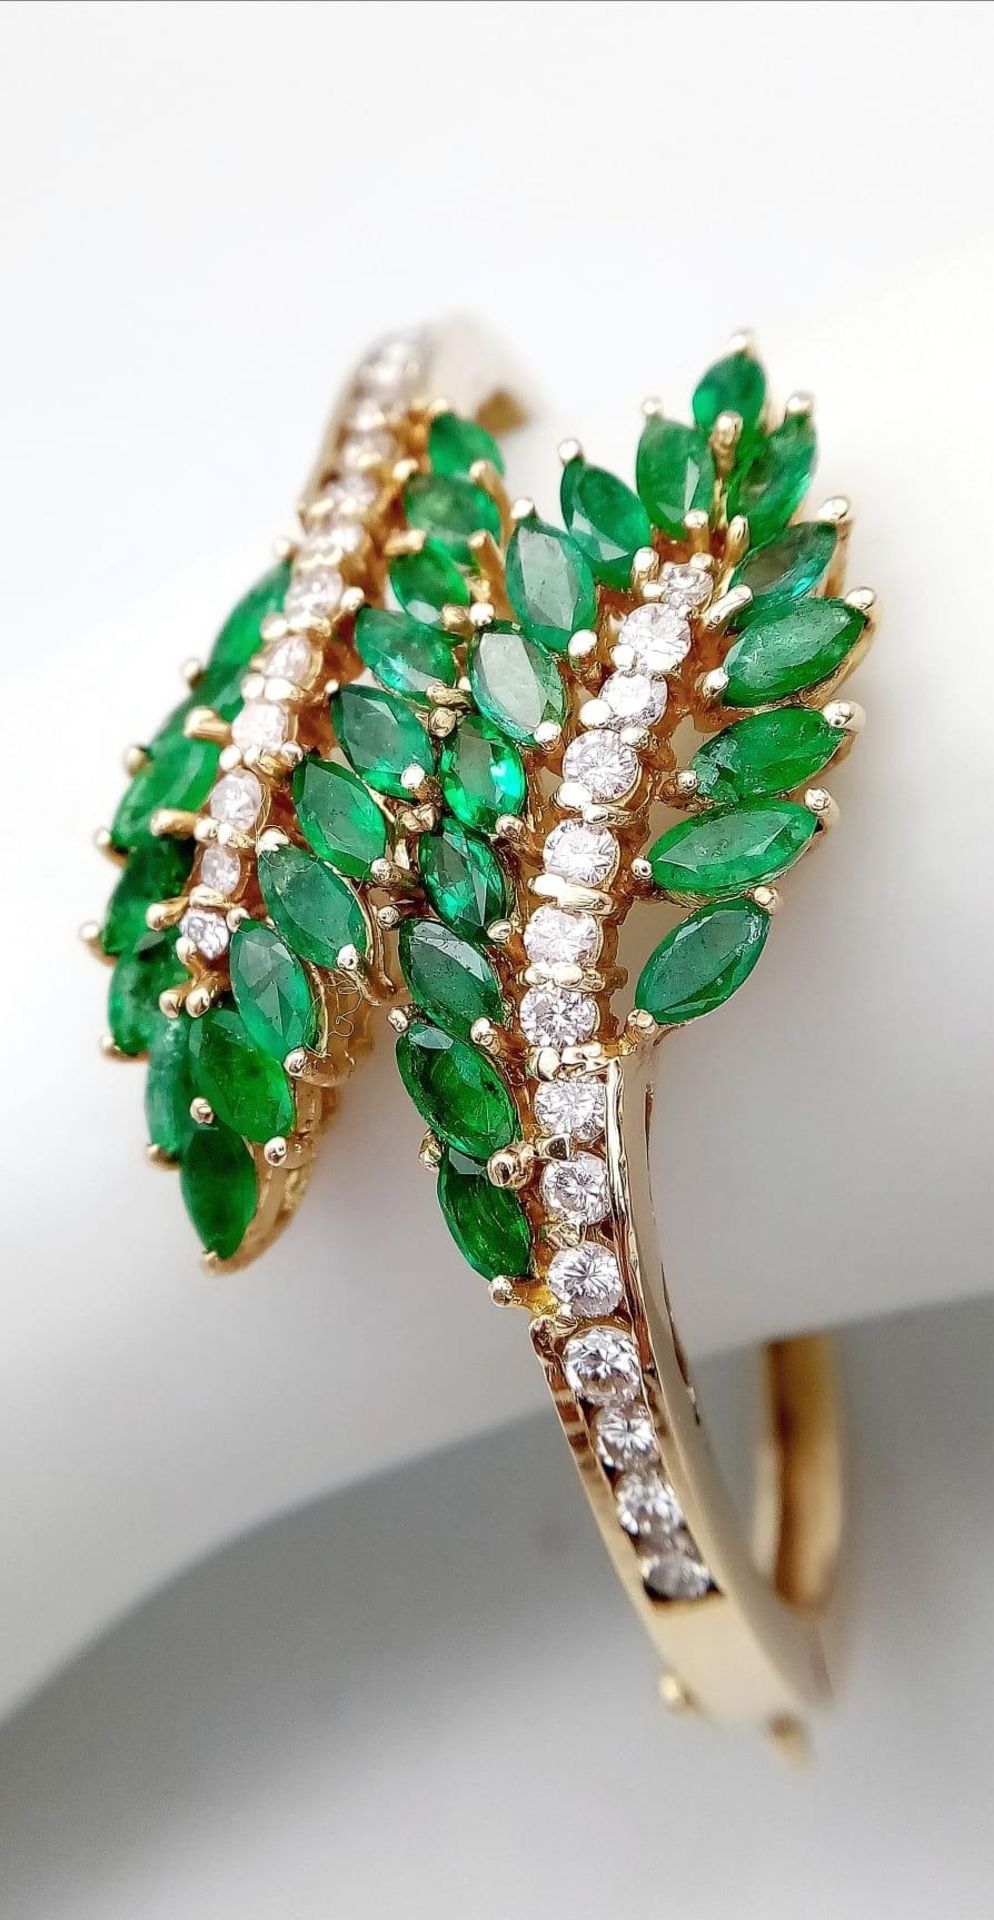 A DIAMOND AND EMERALD LEAF DESIGN BANGLE IN CROSSOVER STYLE SET IN18K GOLD . 33.5gms 10457 - Image 10 of 15